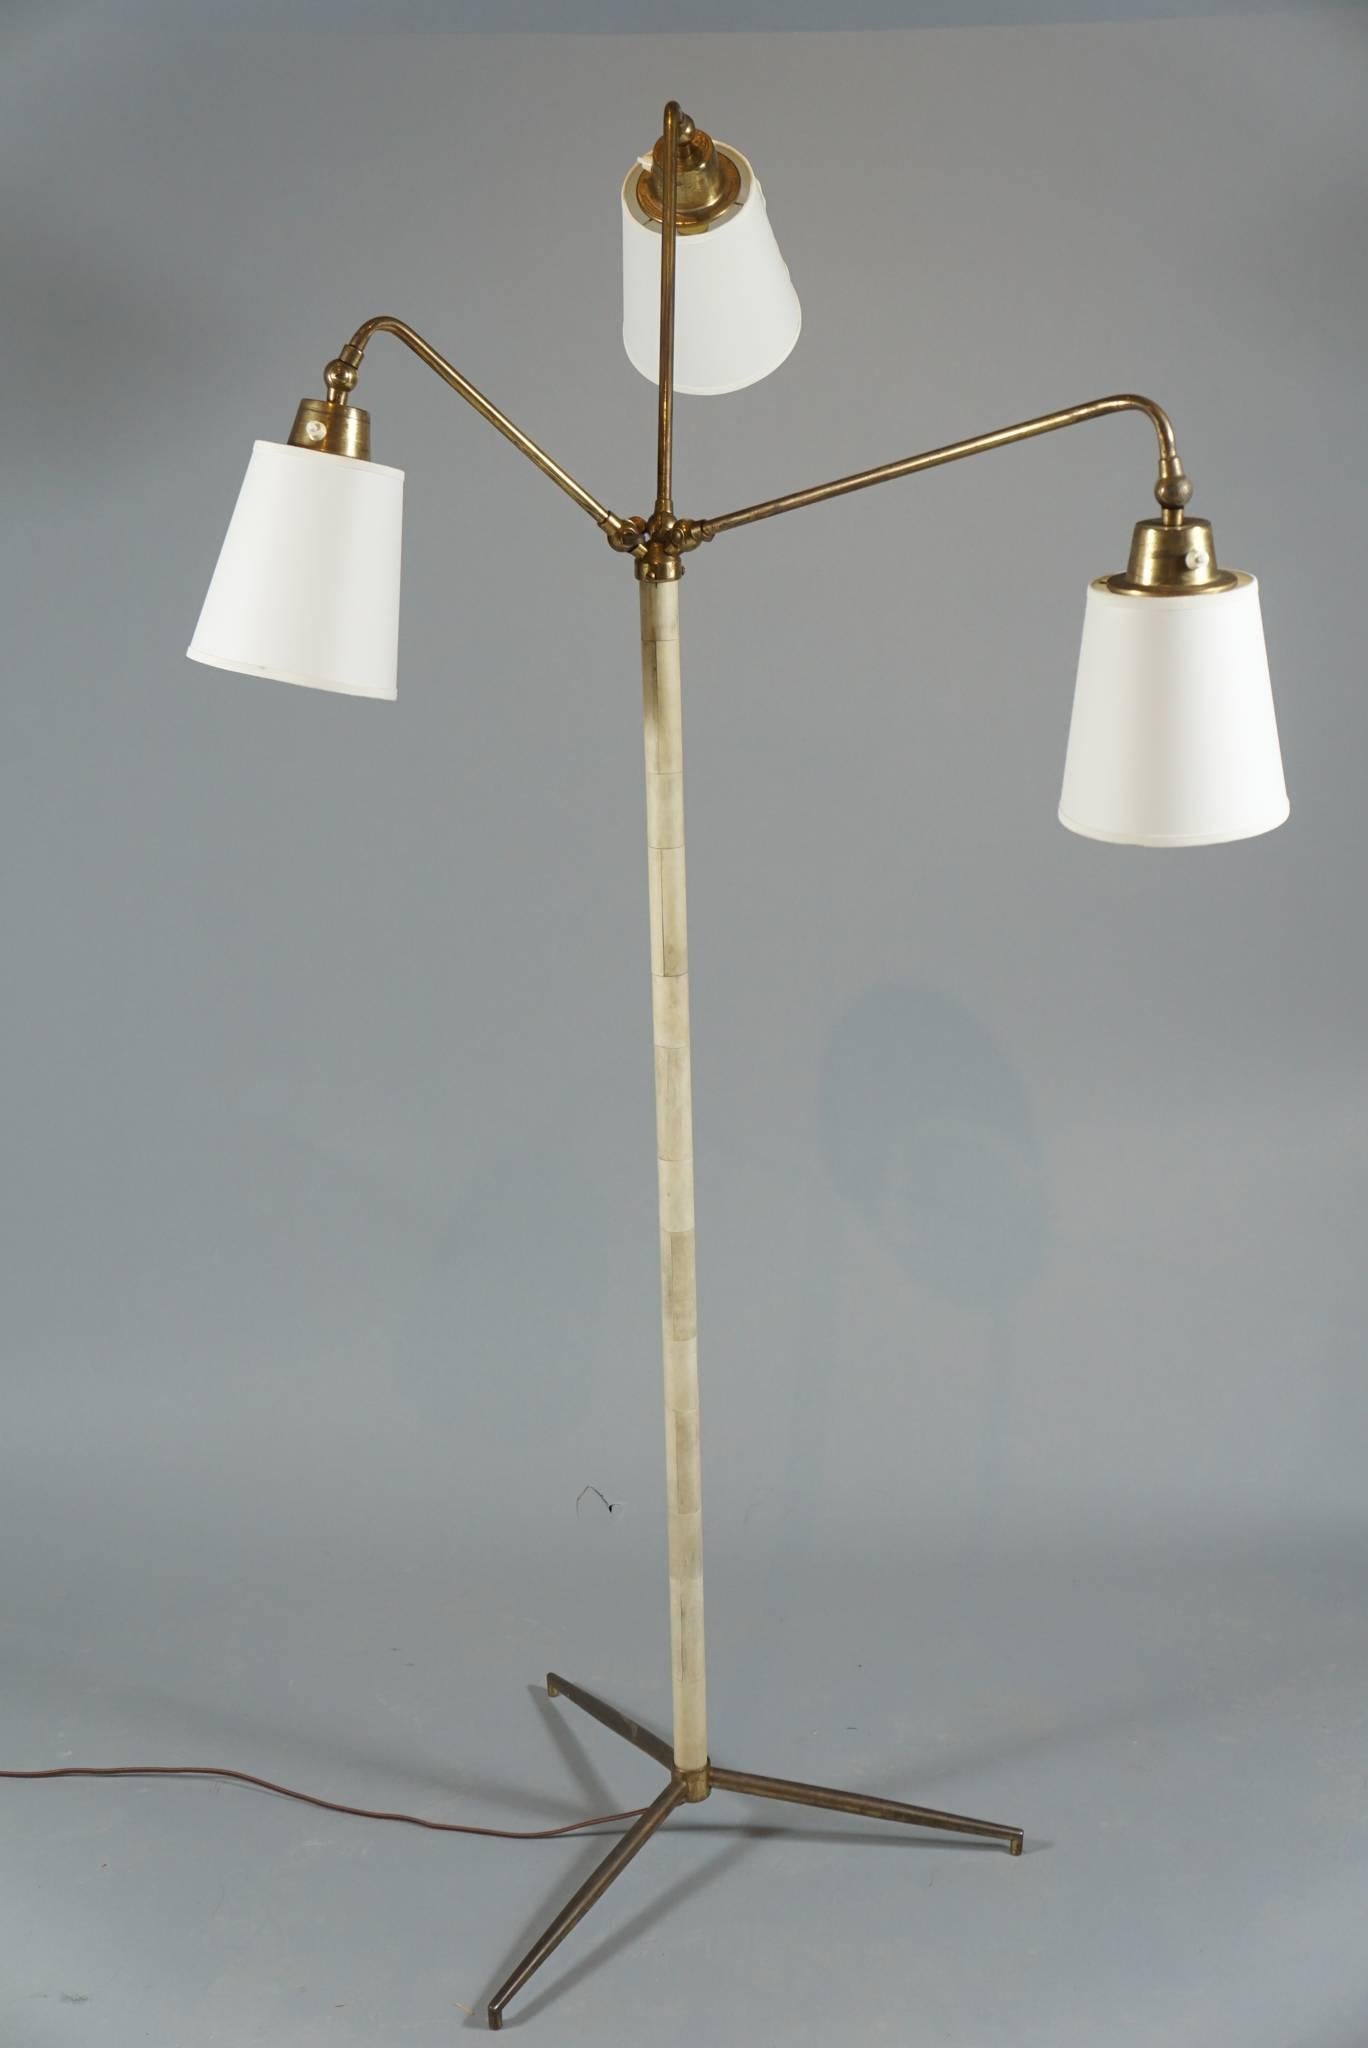 A versatile light for ambience or reading.
Brass shows some signs of age but can be polished.